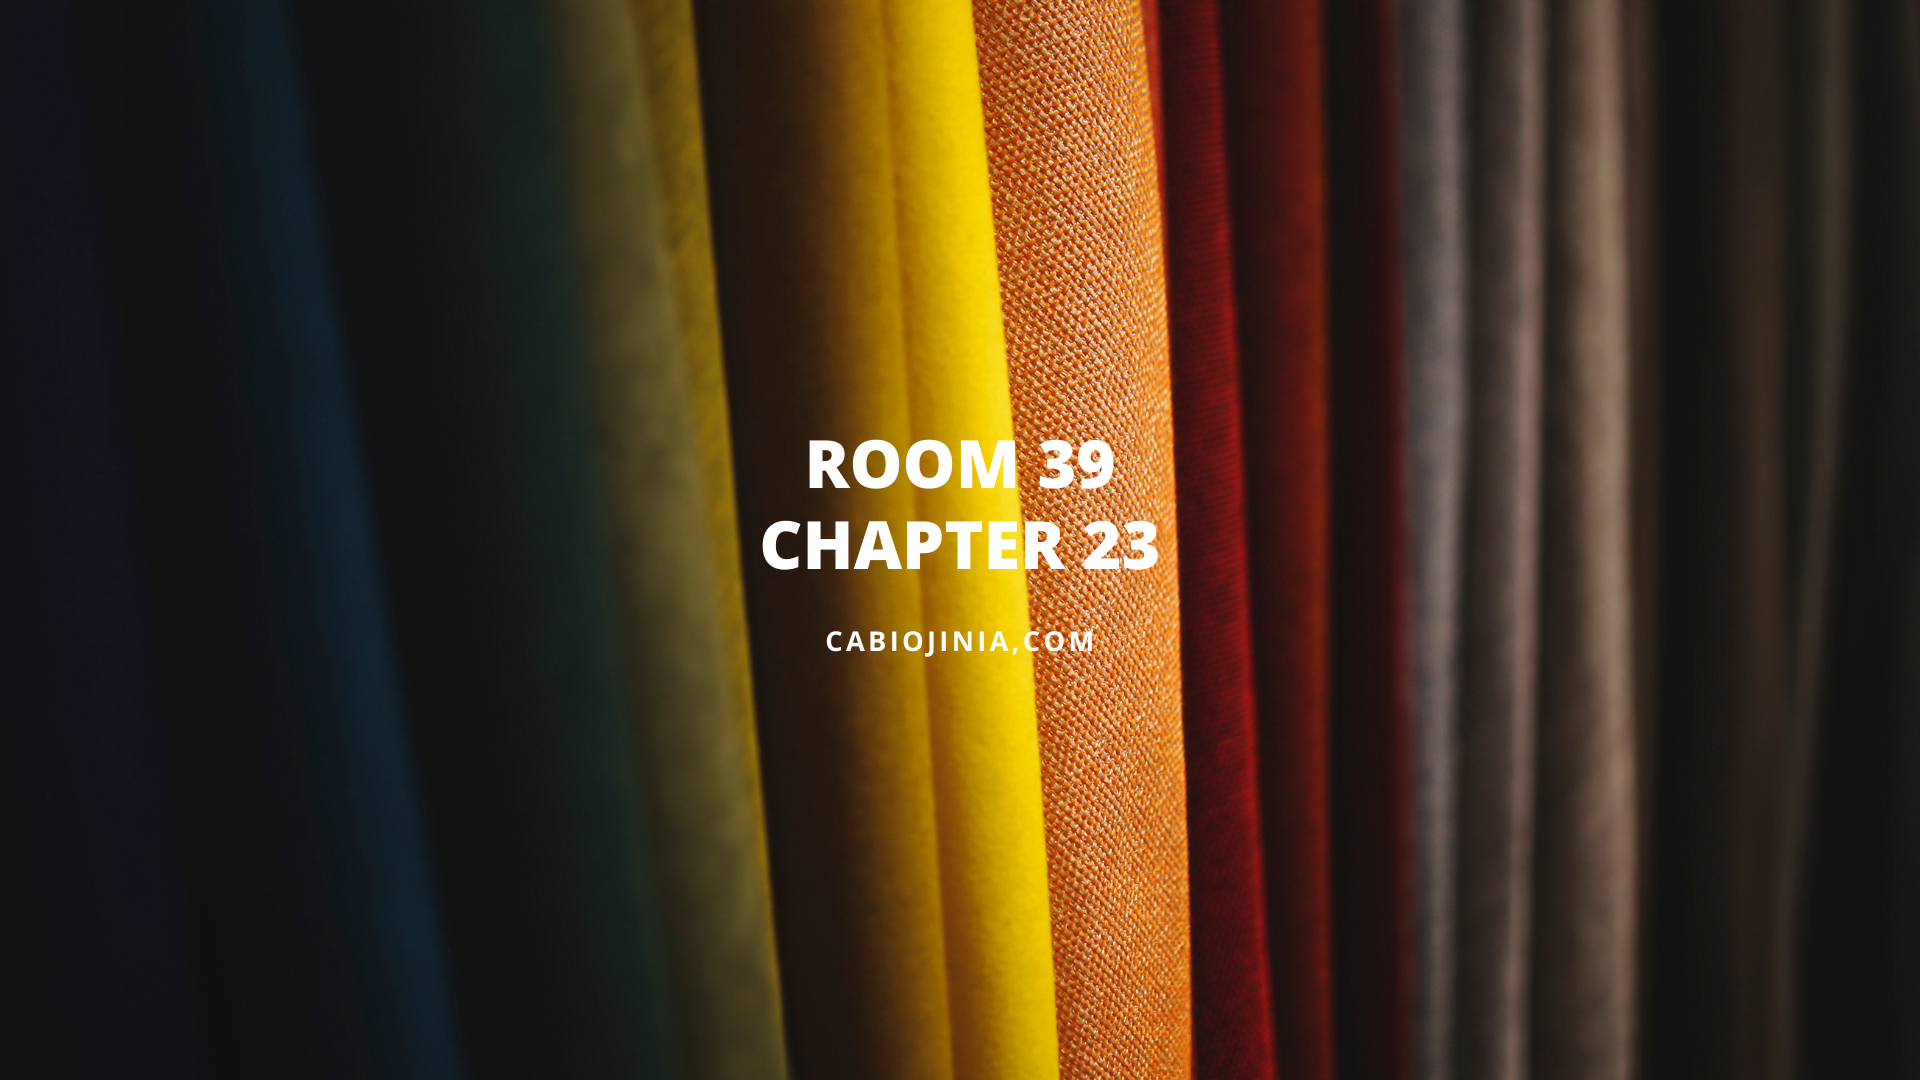 Room 39| Chapter 23 by Cabiojinia